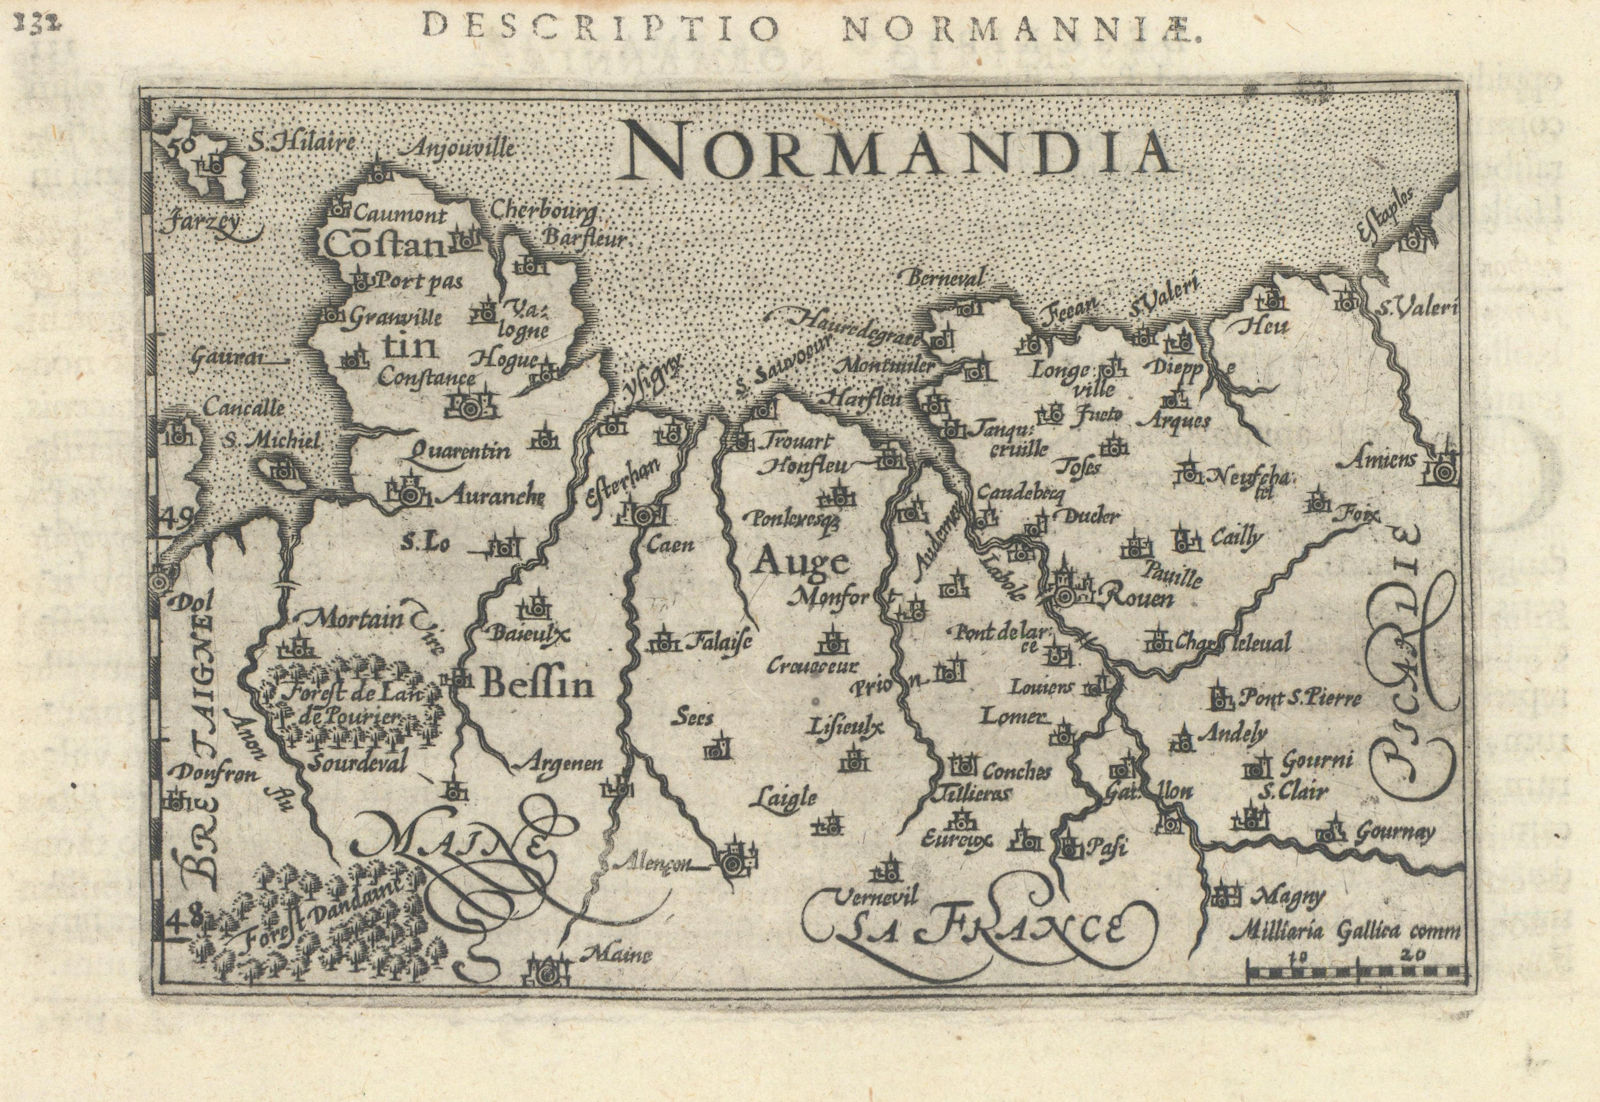 Normanniae / Normandia by Bertius / Langenes. Normandy 1603 old antique map